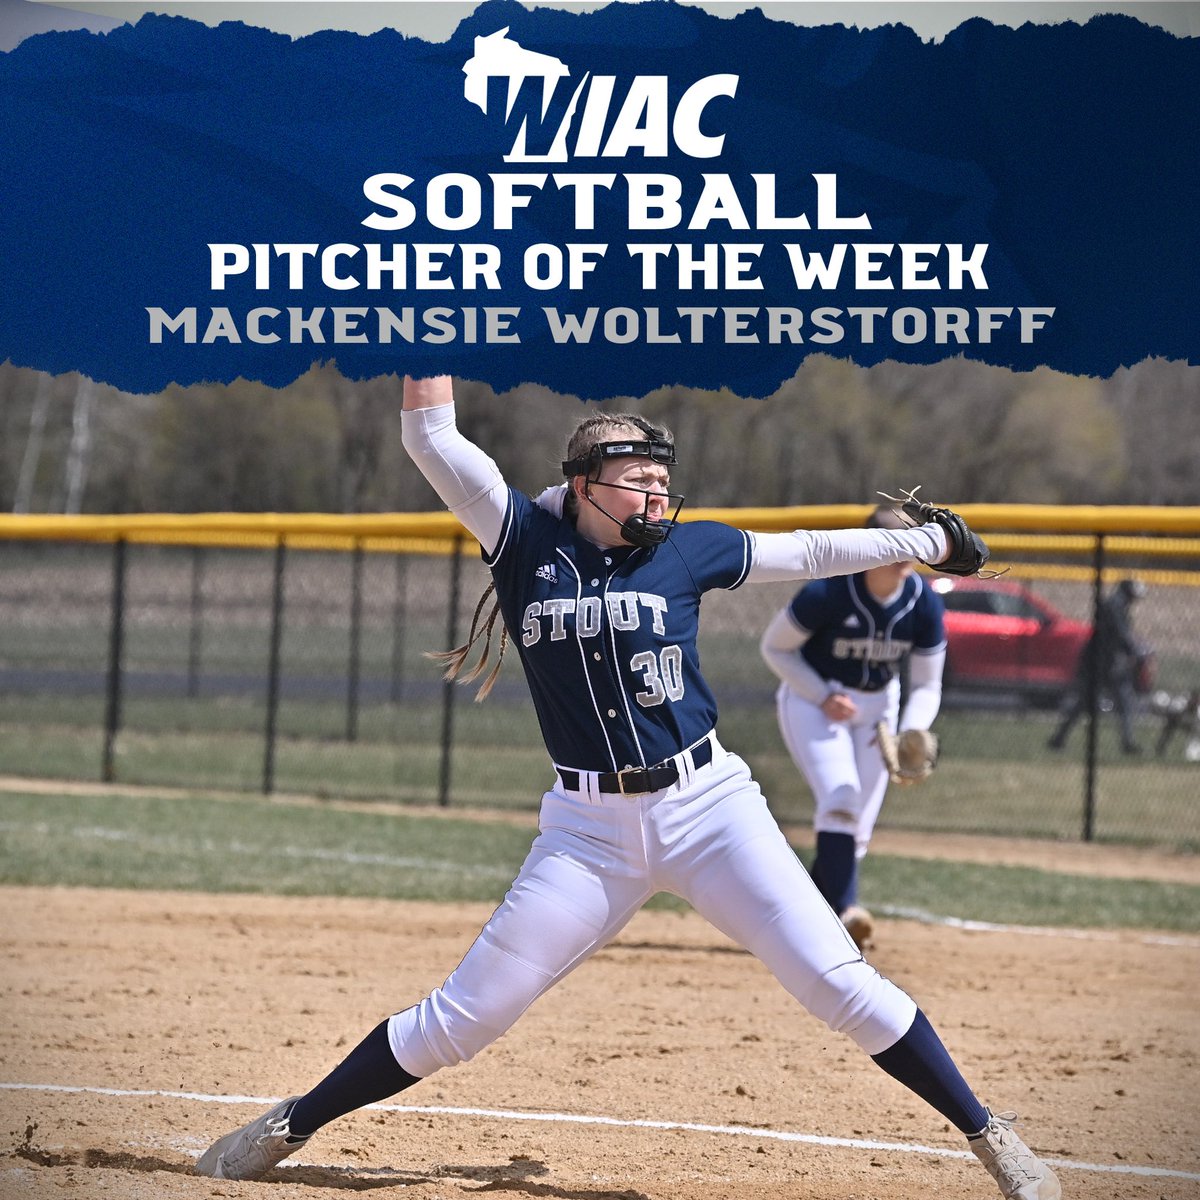 Congratulations to senior pitcher Mackensie Wolterstorff for winning WIAC pitcher of the week! Mack threw 23.2 innings last week giving up 5 earned runs while striking out 18, and earning 2 wins, including a big complete game 2-1 victory over #15 Whitewater! #RollDevs #HTR